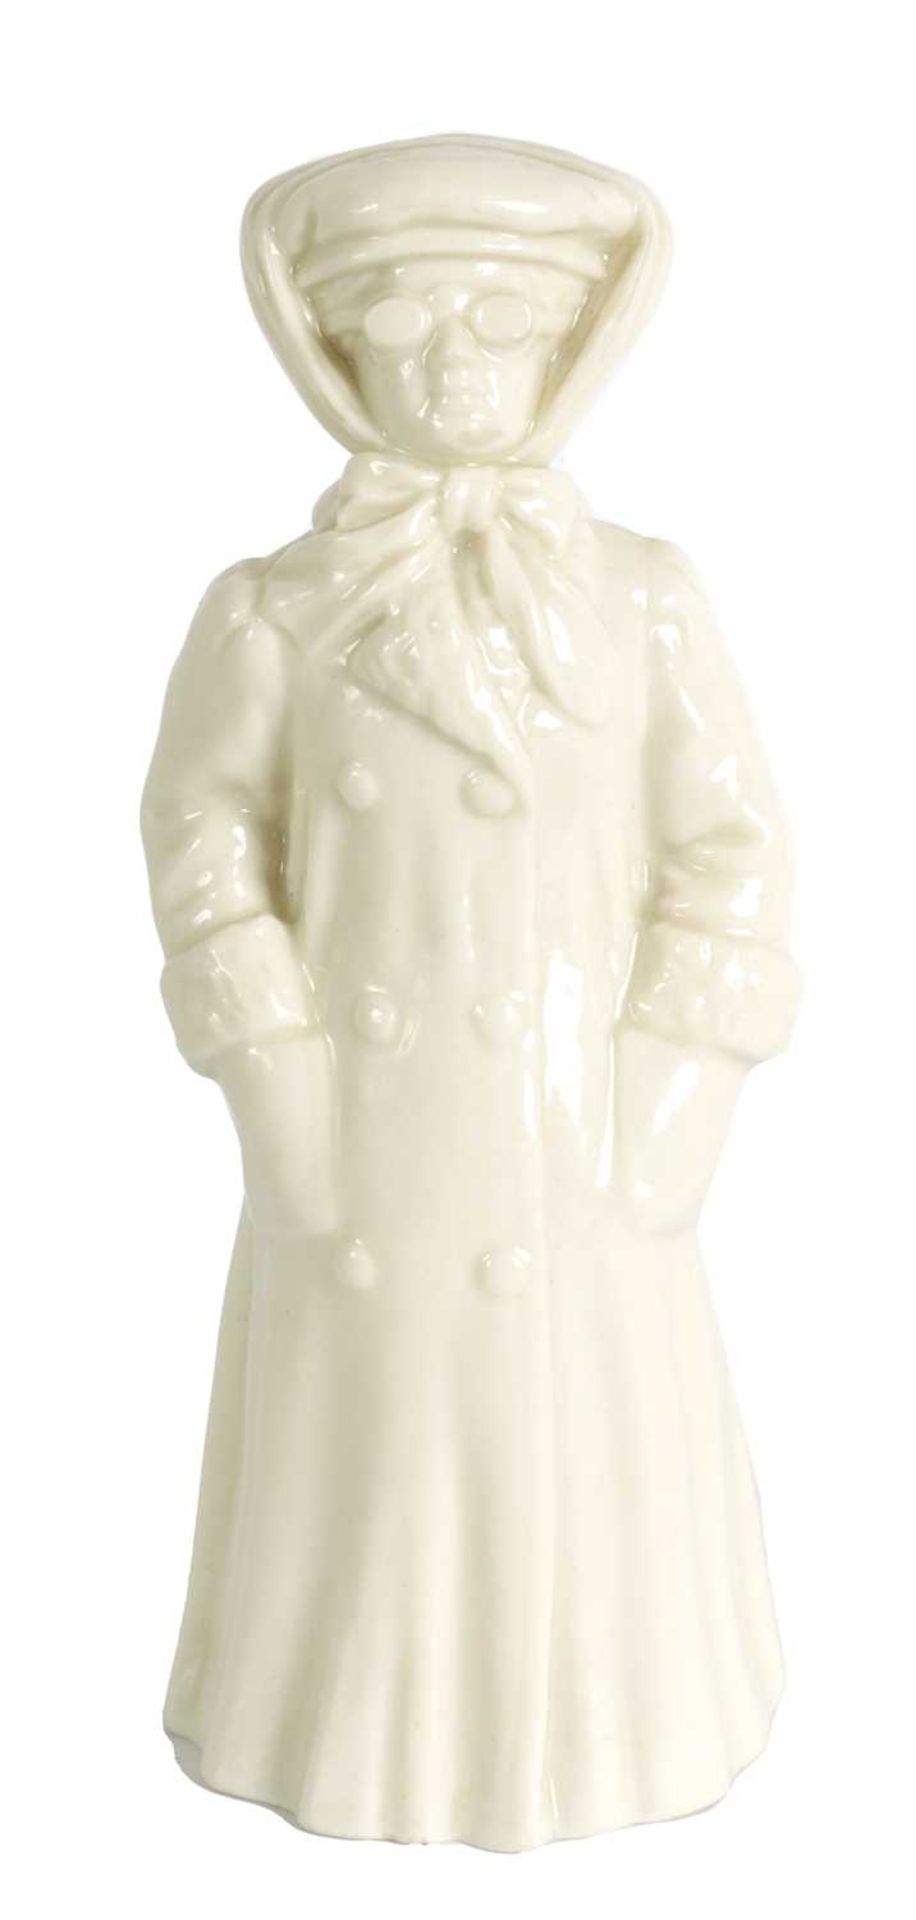 THE MOTORIST. A VERY RARE ROYAL WORCESTER PORCELAIN CANDLE EXTINGUISHER